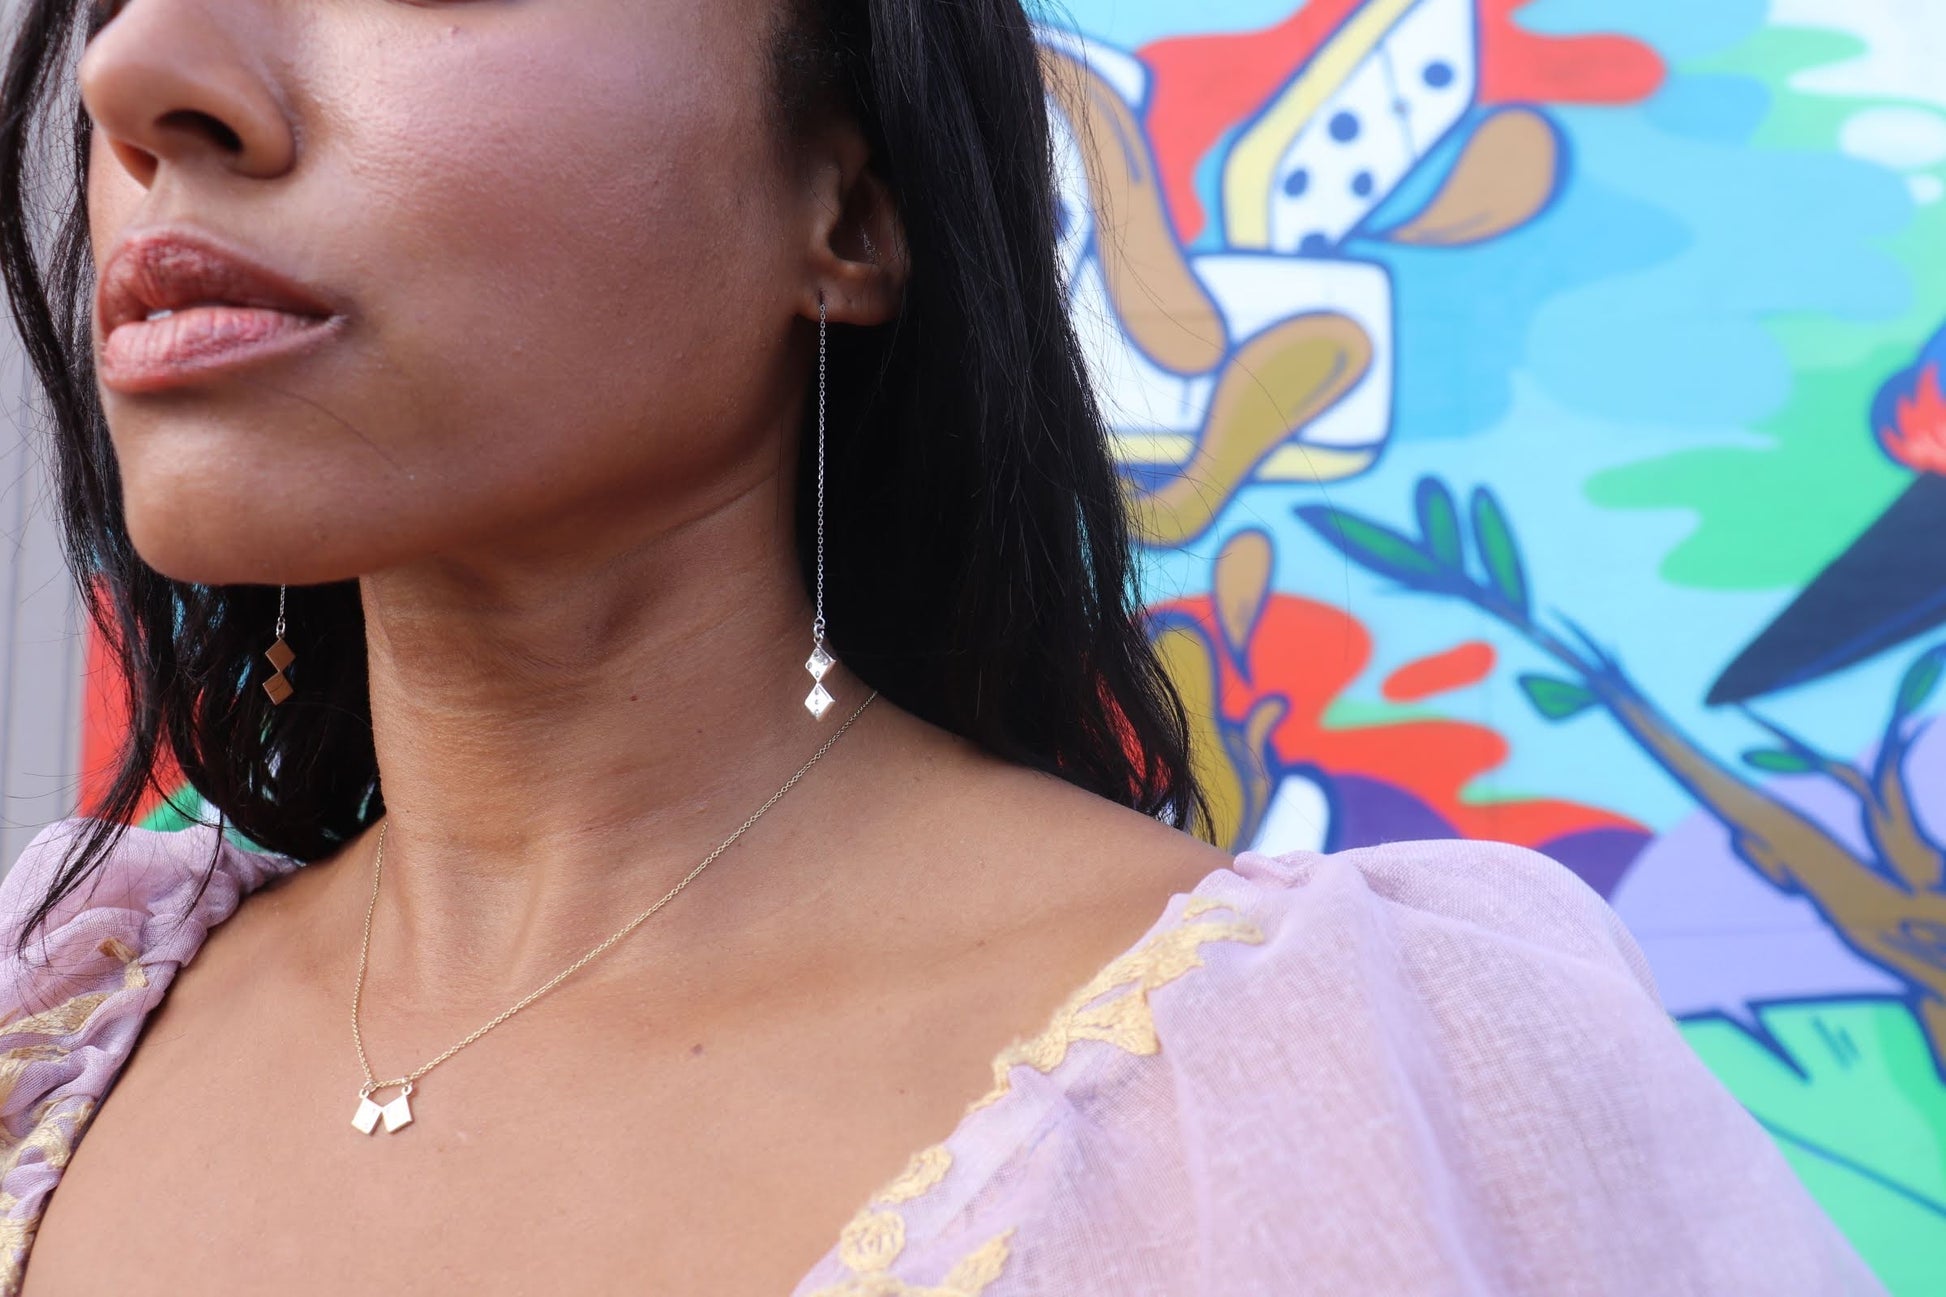 black woman in pink puffy sleeve renaissance blouse standing in front of graffiti wall wearing gold dice necklace and matching earrings